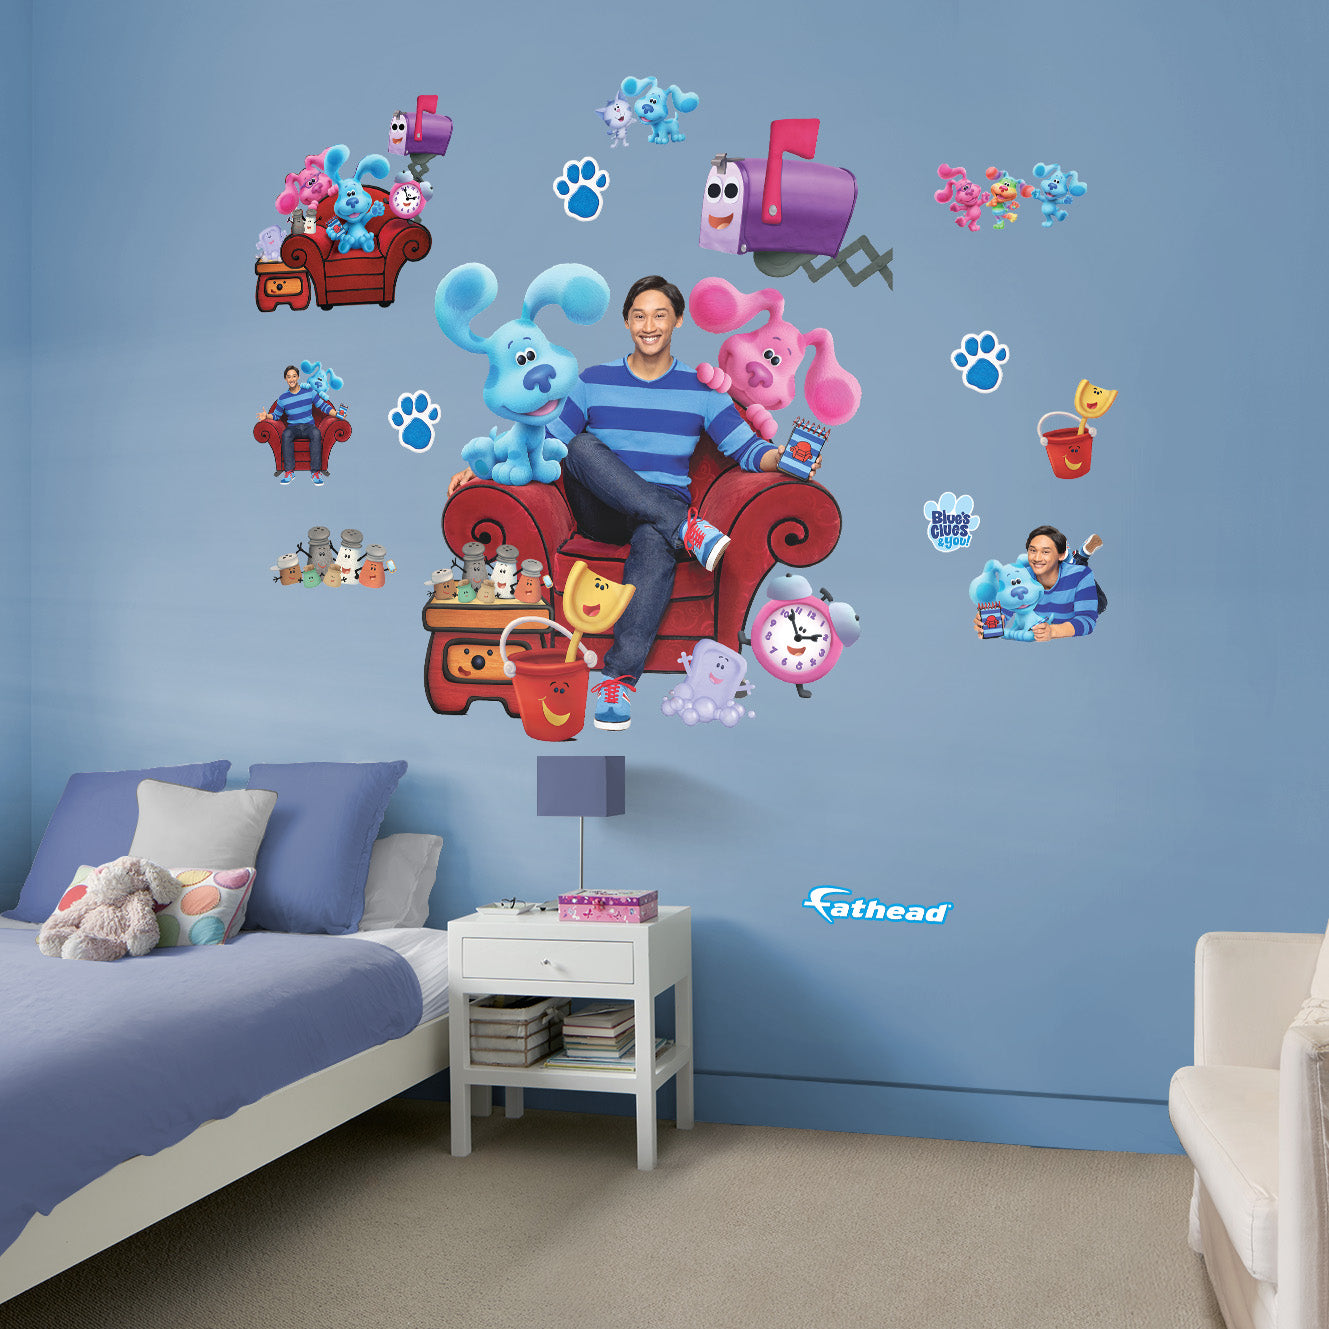 Life-Size Character +11 Decals (50"W x 63"H)